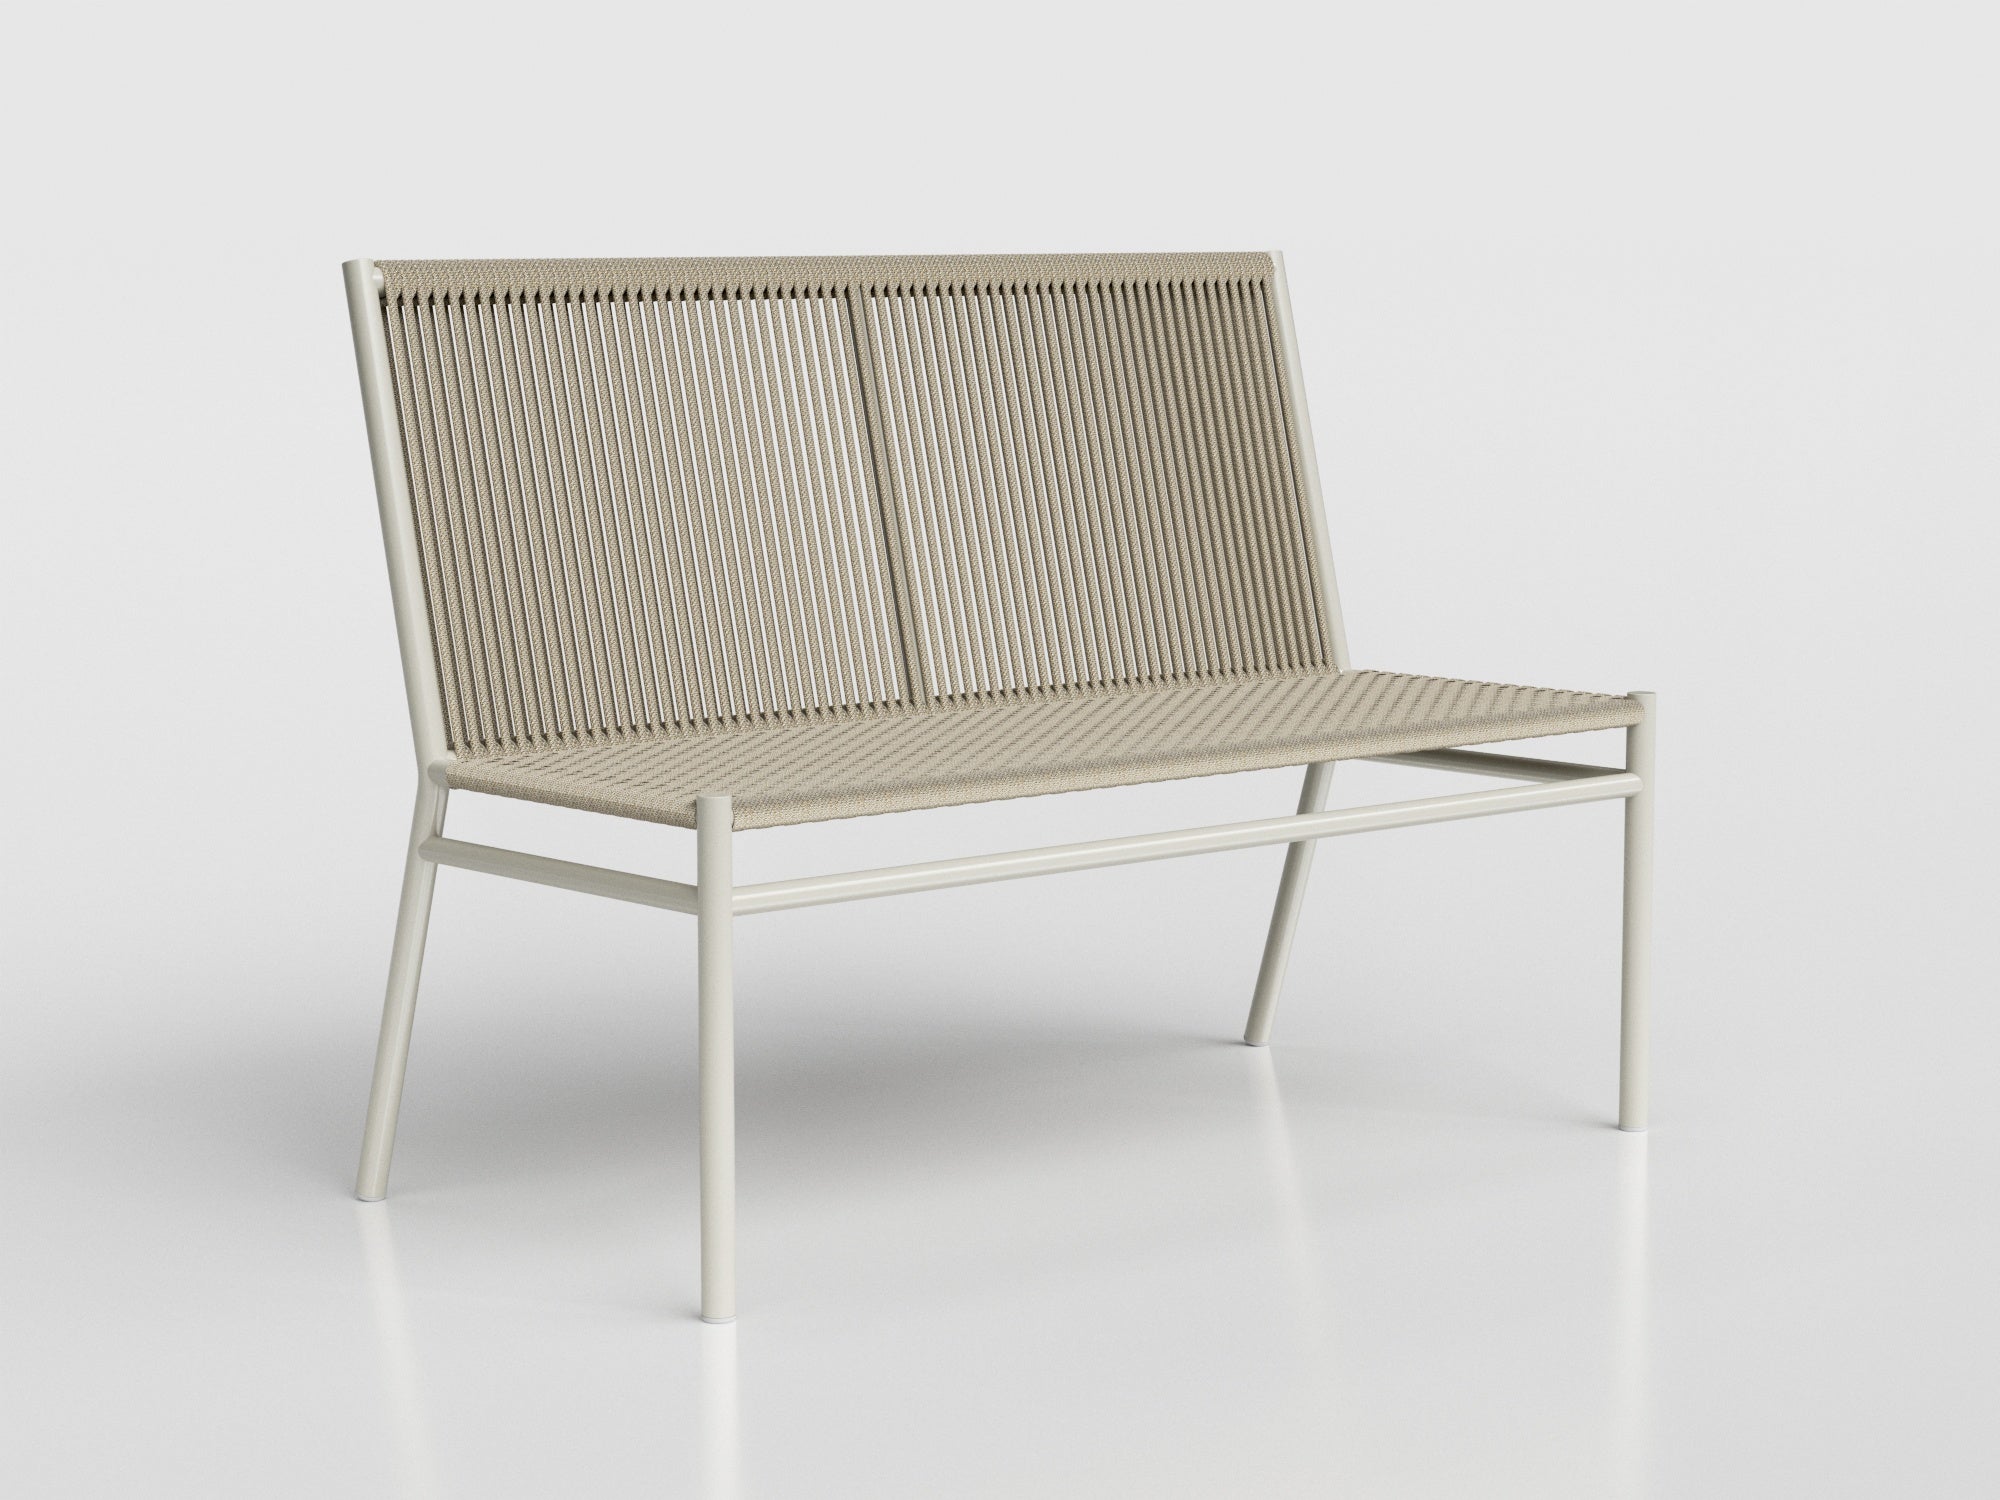 Bora Bora armless two seats bench made of nautical rope and gray aluminum, designed by Luciano Mandelli 